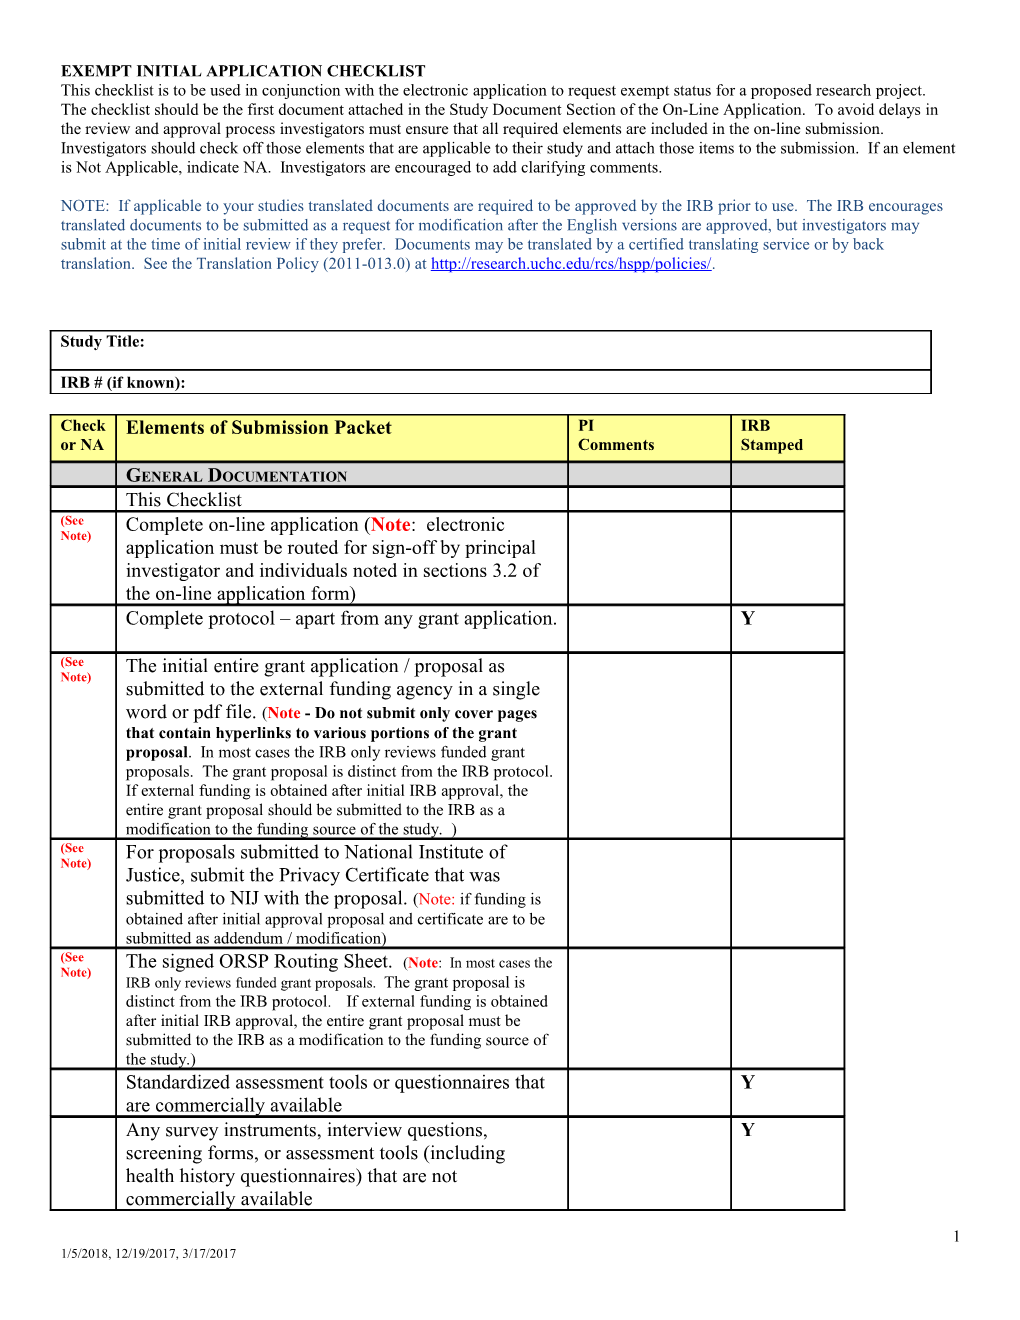 This Checklist Is to Be Used in Conjunction with New Applications Requiring Review